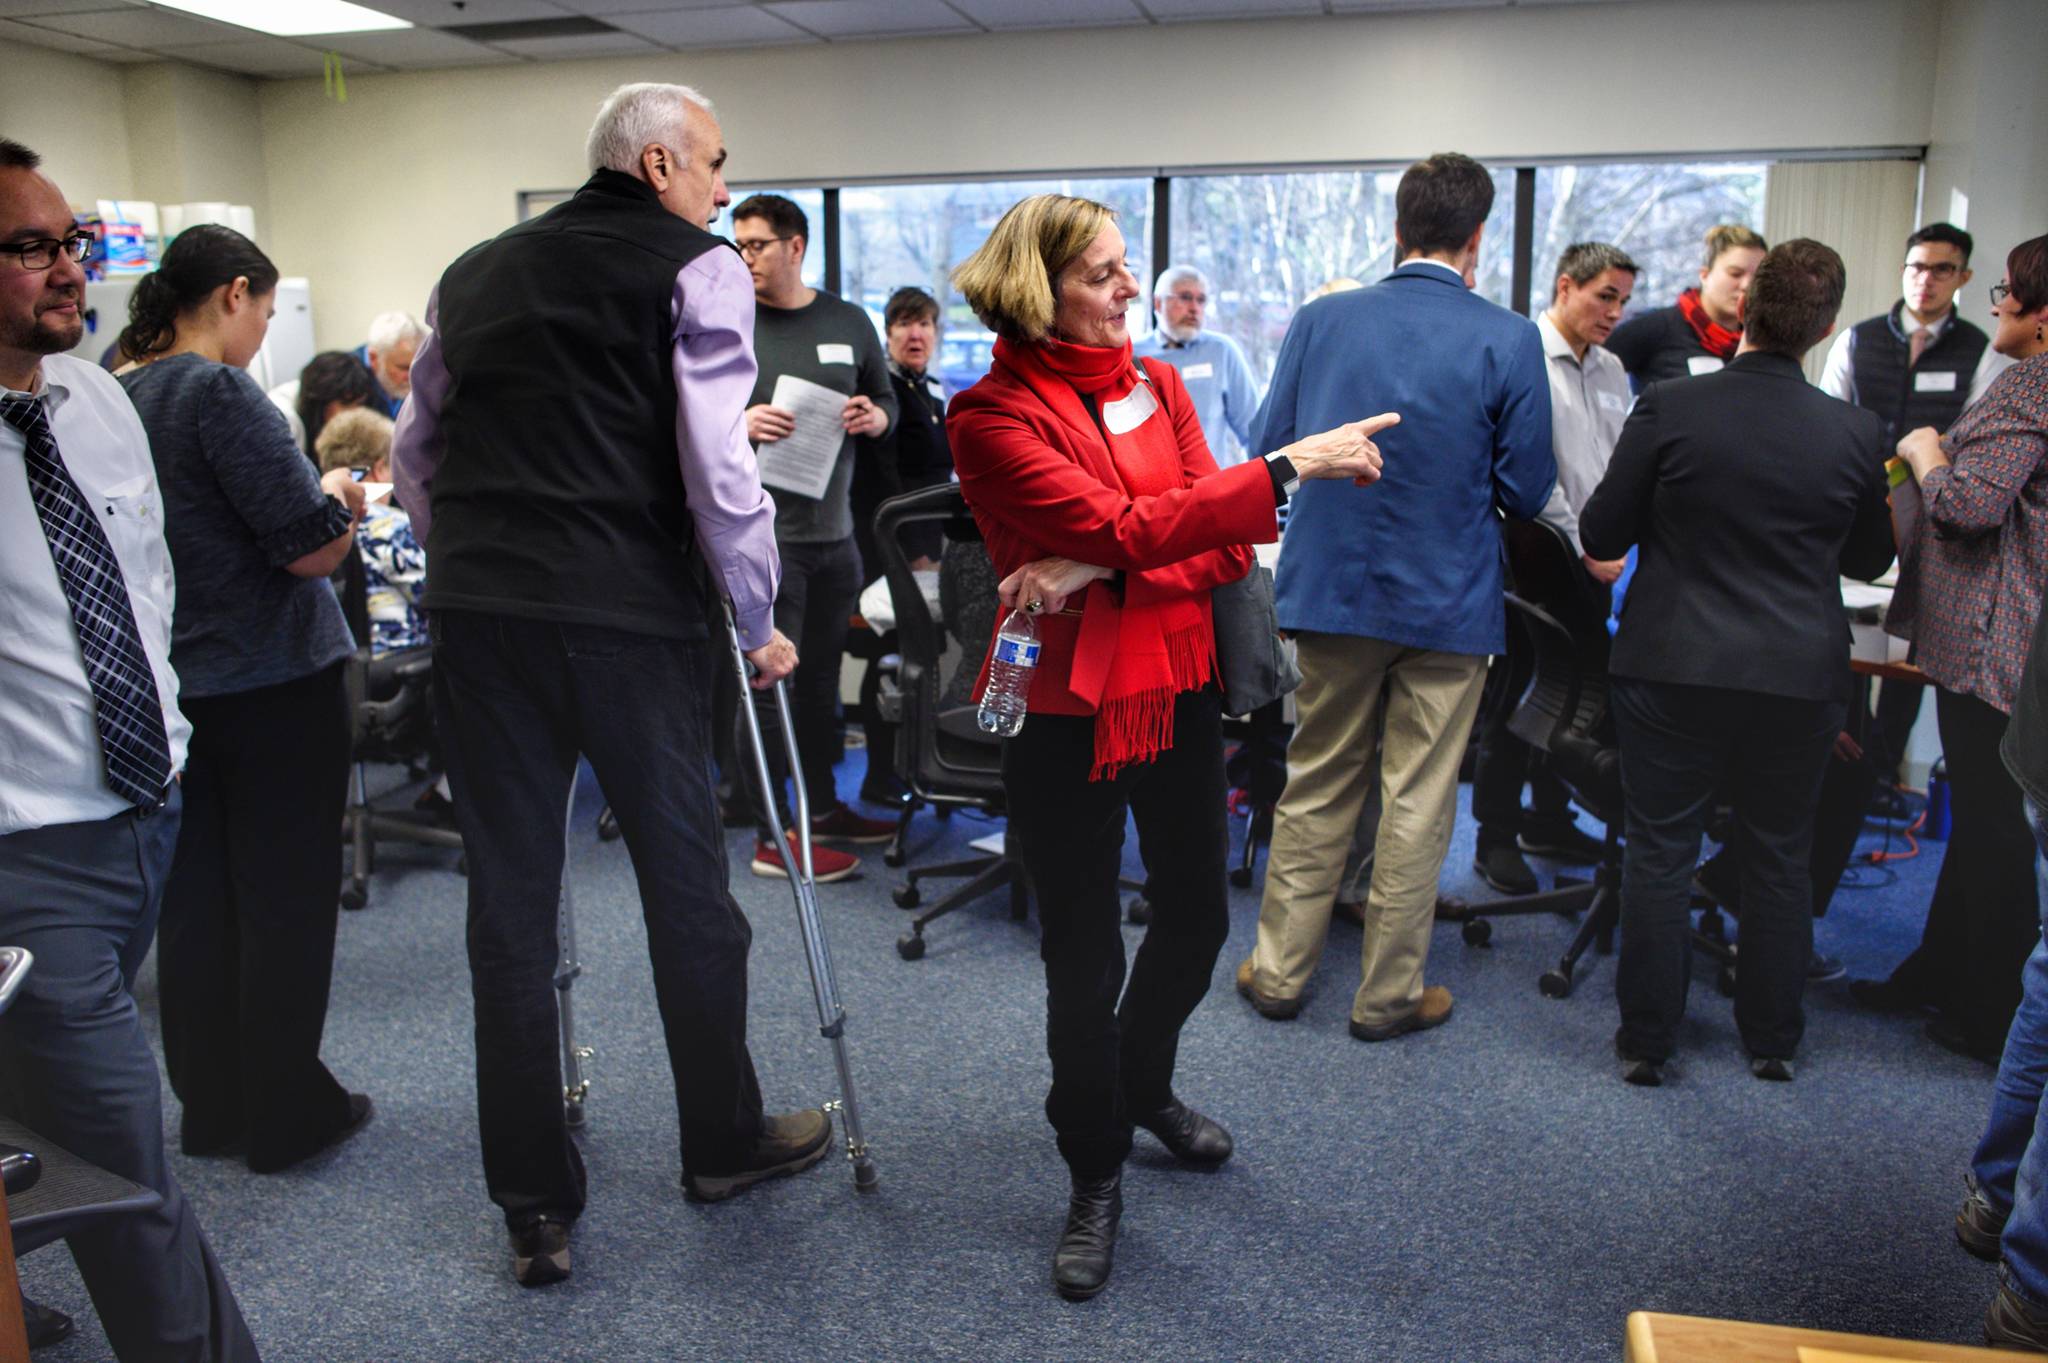 House District 1 Republican candidate Bart LeBon (on crutches) and Democratic candidate Kathryn Dodge (red jacket) watch ballots get counted at the Department of Elections on Friday, Nov. 30, 2018. (Michael Penn | Juneau Empire)